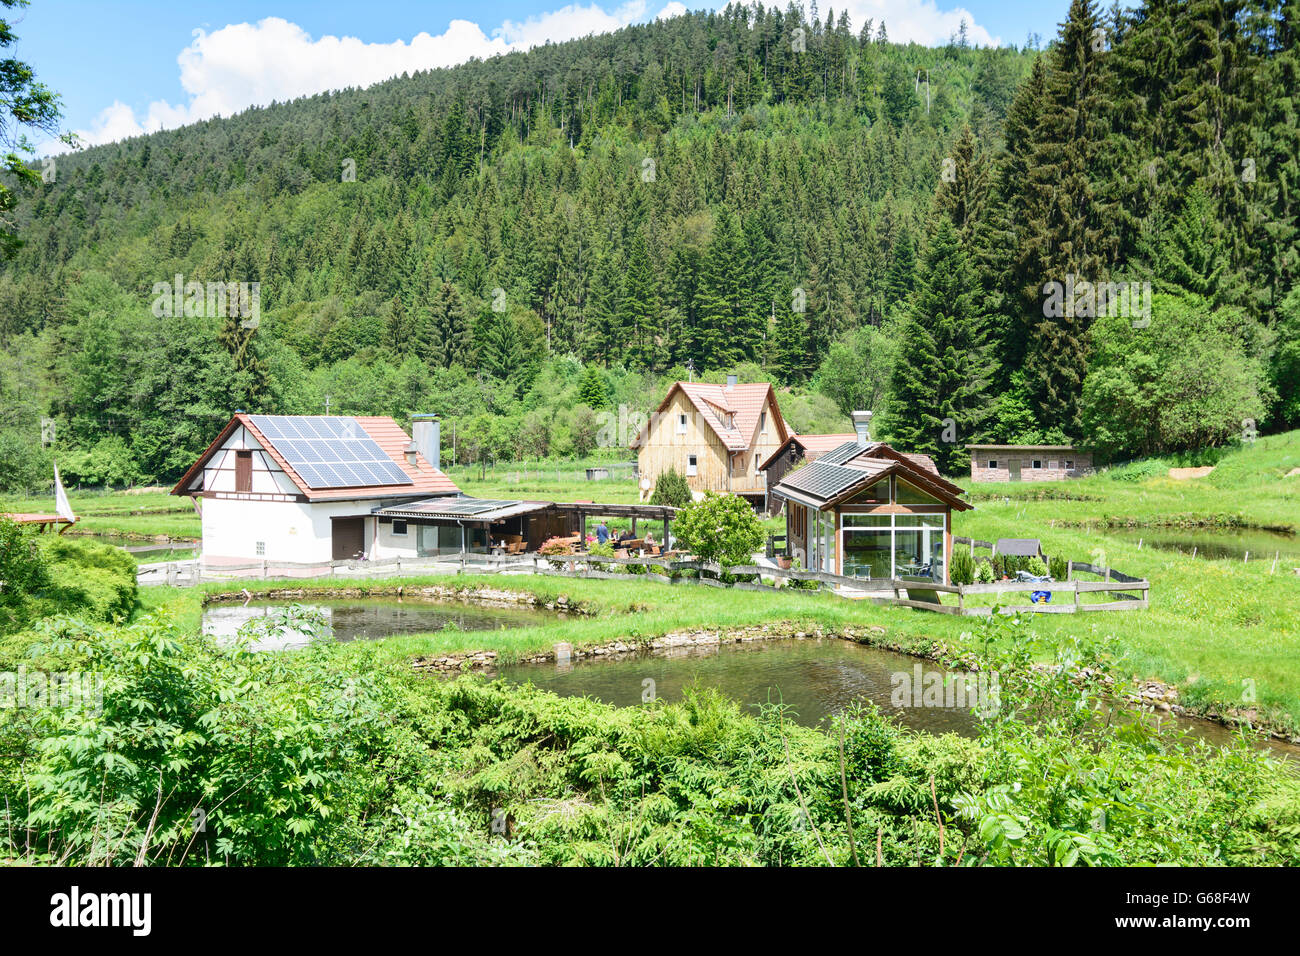 trout farming facility Calmbach, Restaurant in Würzbach valley, Bad Wildbad, Germany, Baden-Württemberg, Schwarzwald, Black Fore Stock Photo